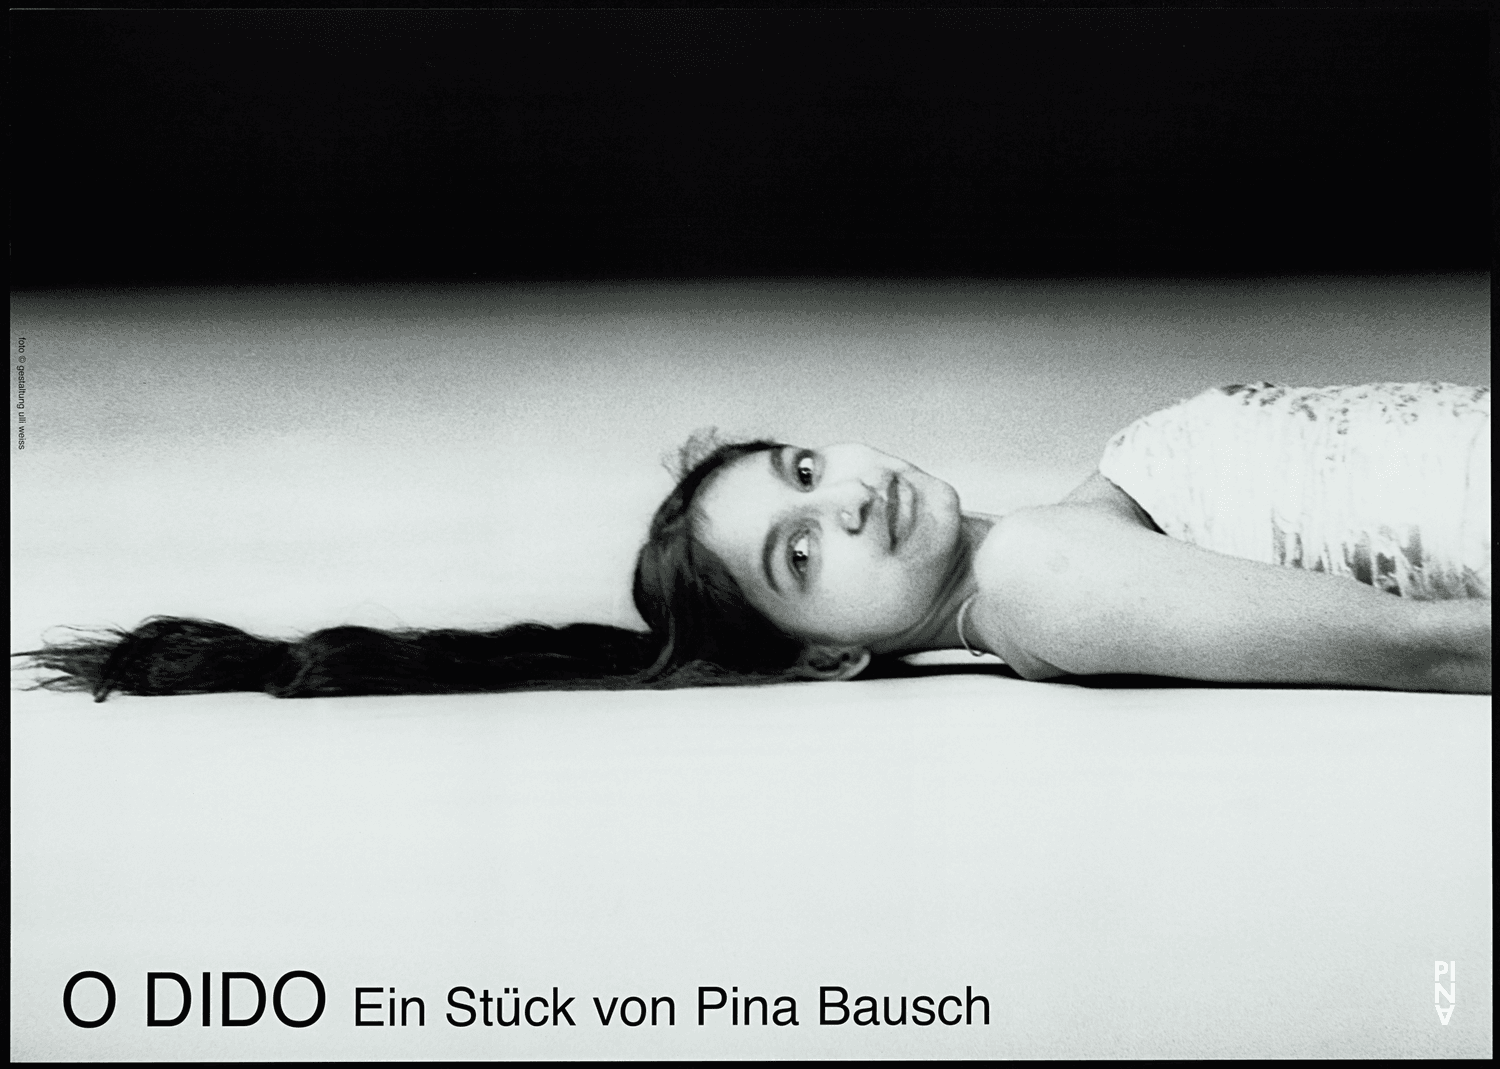 Poster for “O Dido” by Pina Bausch